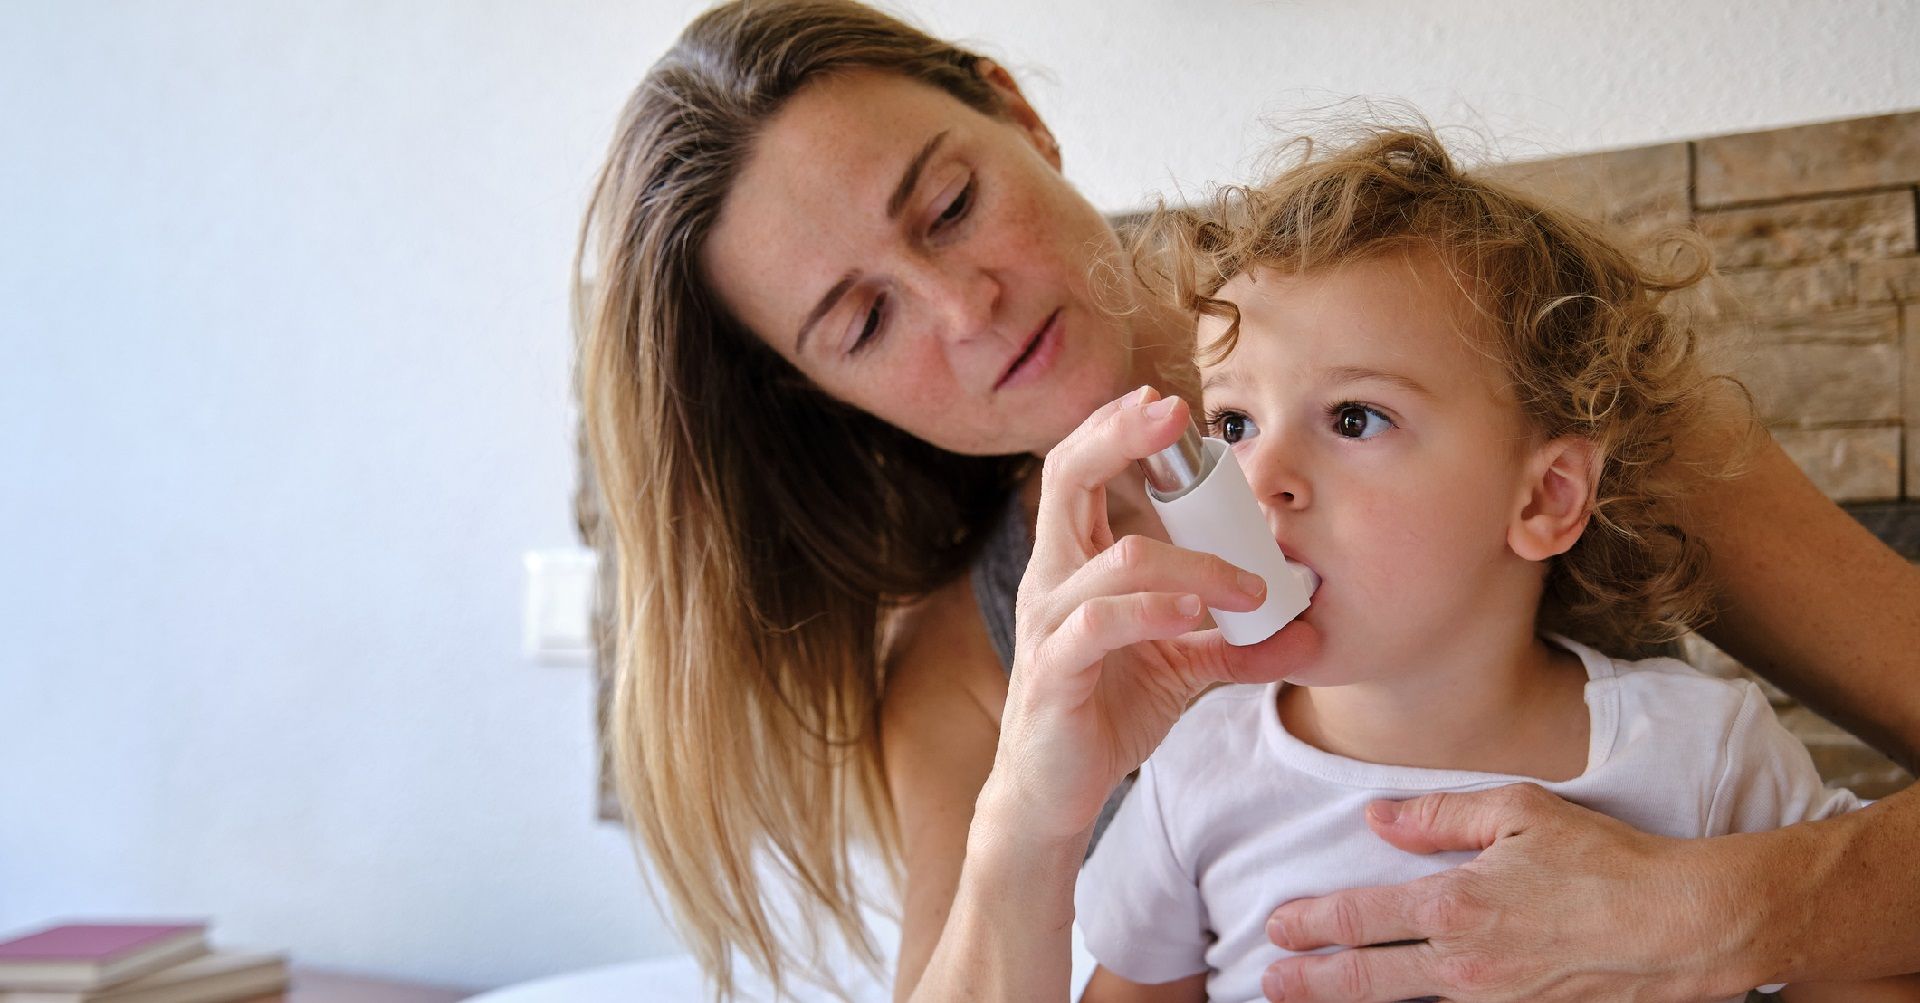 Mother assisting child with asthma inhaler